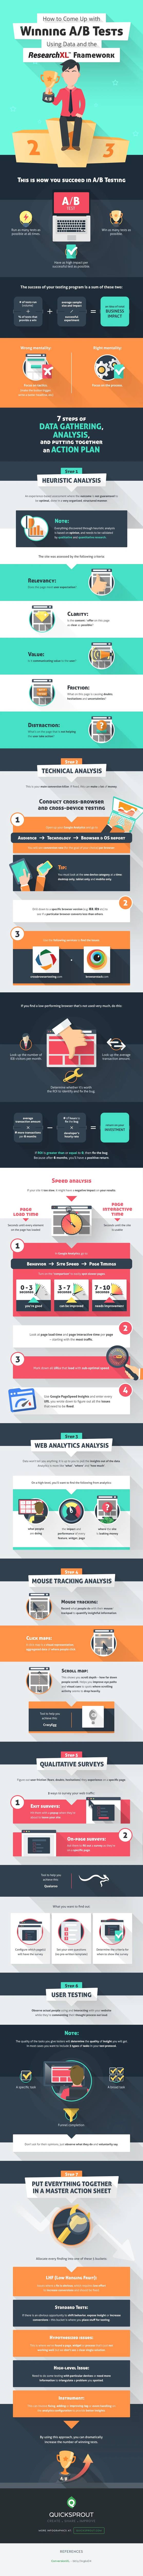 How to Come Up with Winning A/B Tests Using Data - #infographic